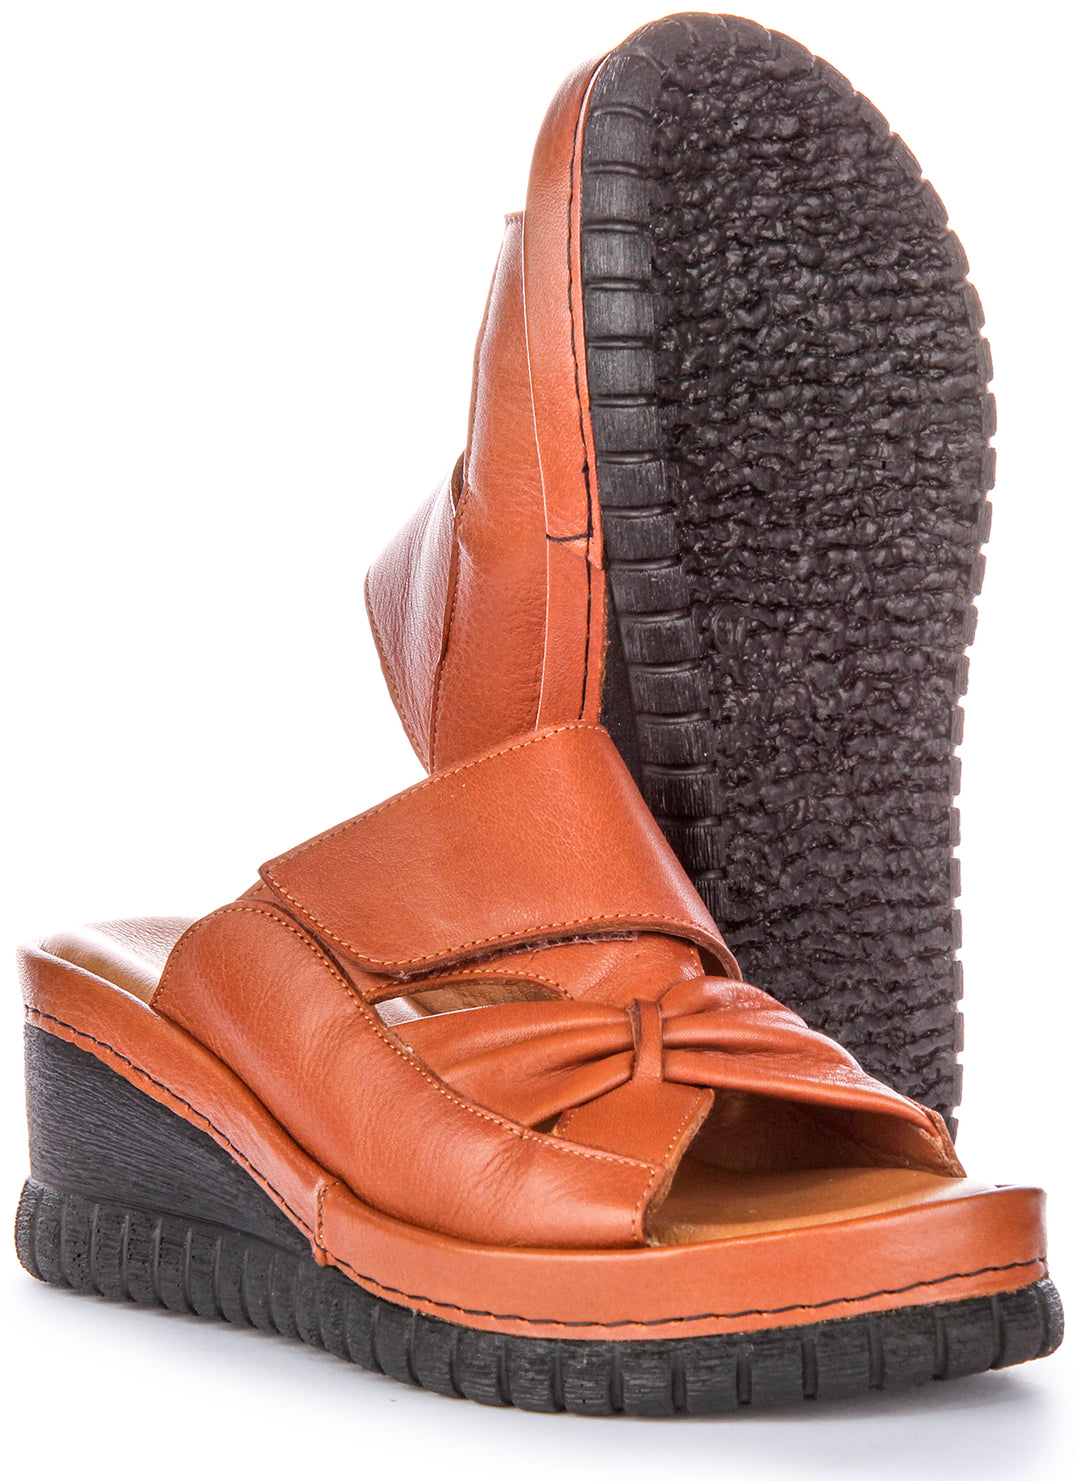 Sloane Soft Footbed Wedge Sandals In Tan